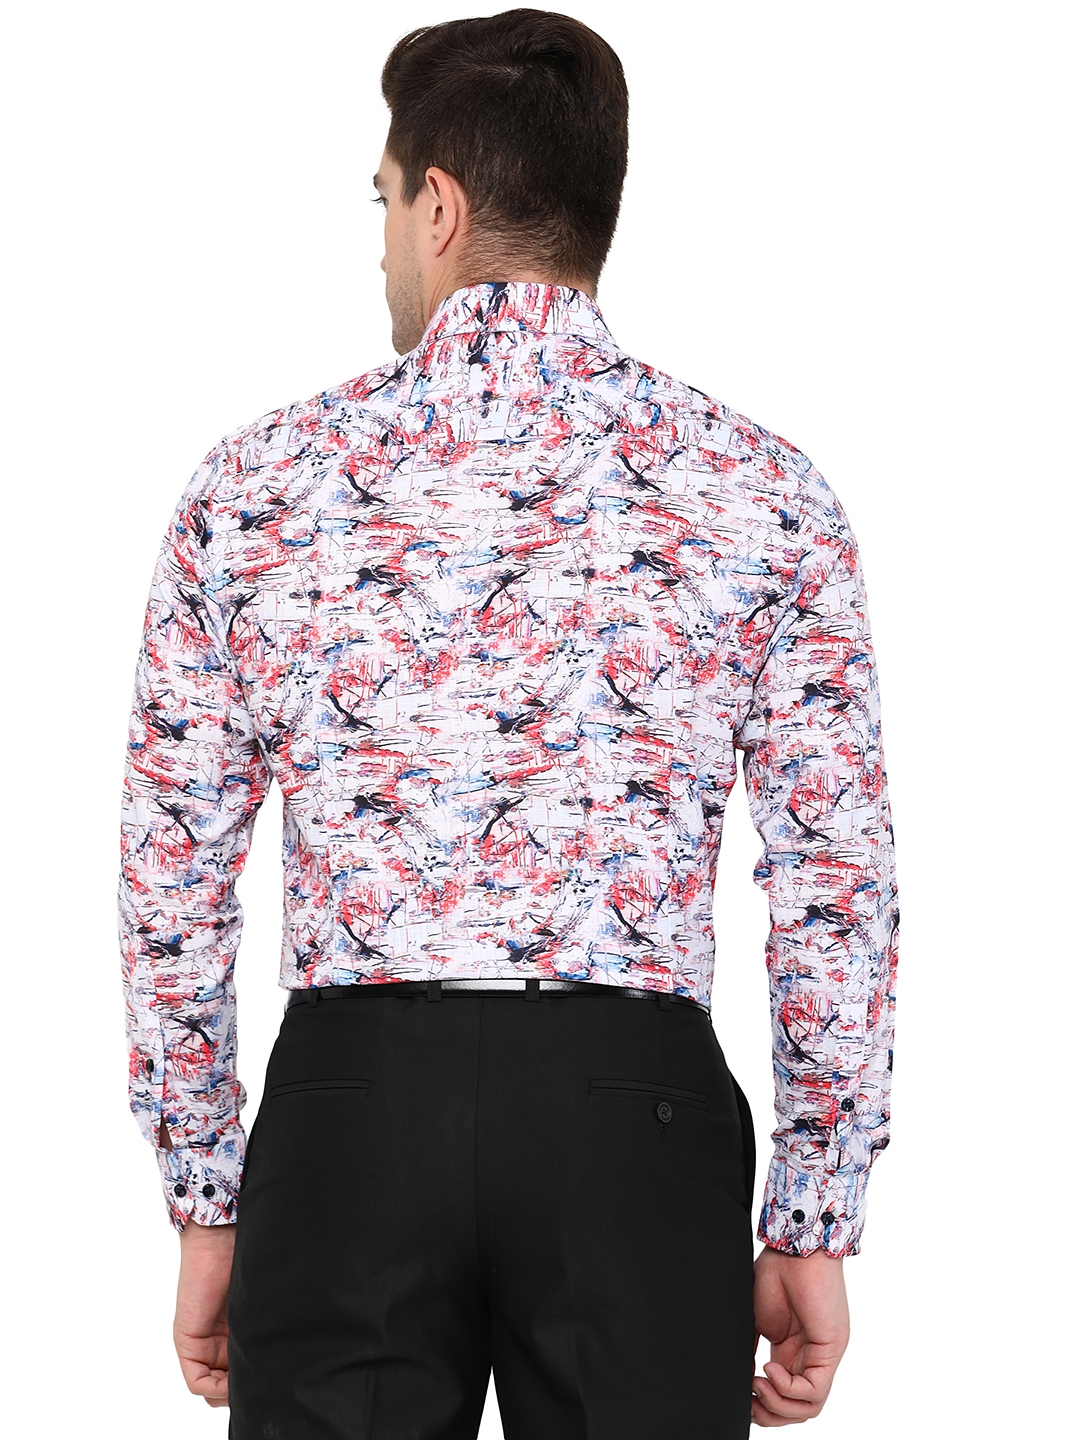 Greenfibre | Multicolor Printed Slim Fit Party Wear Shirt | Greenfibre 2